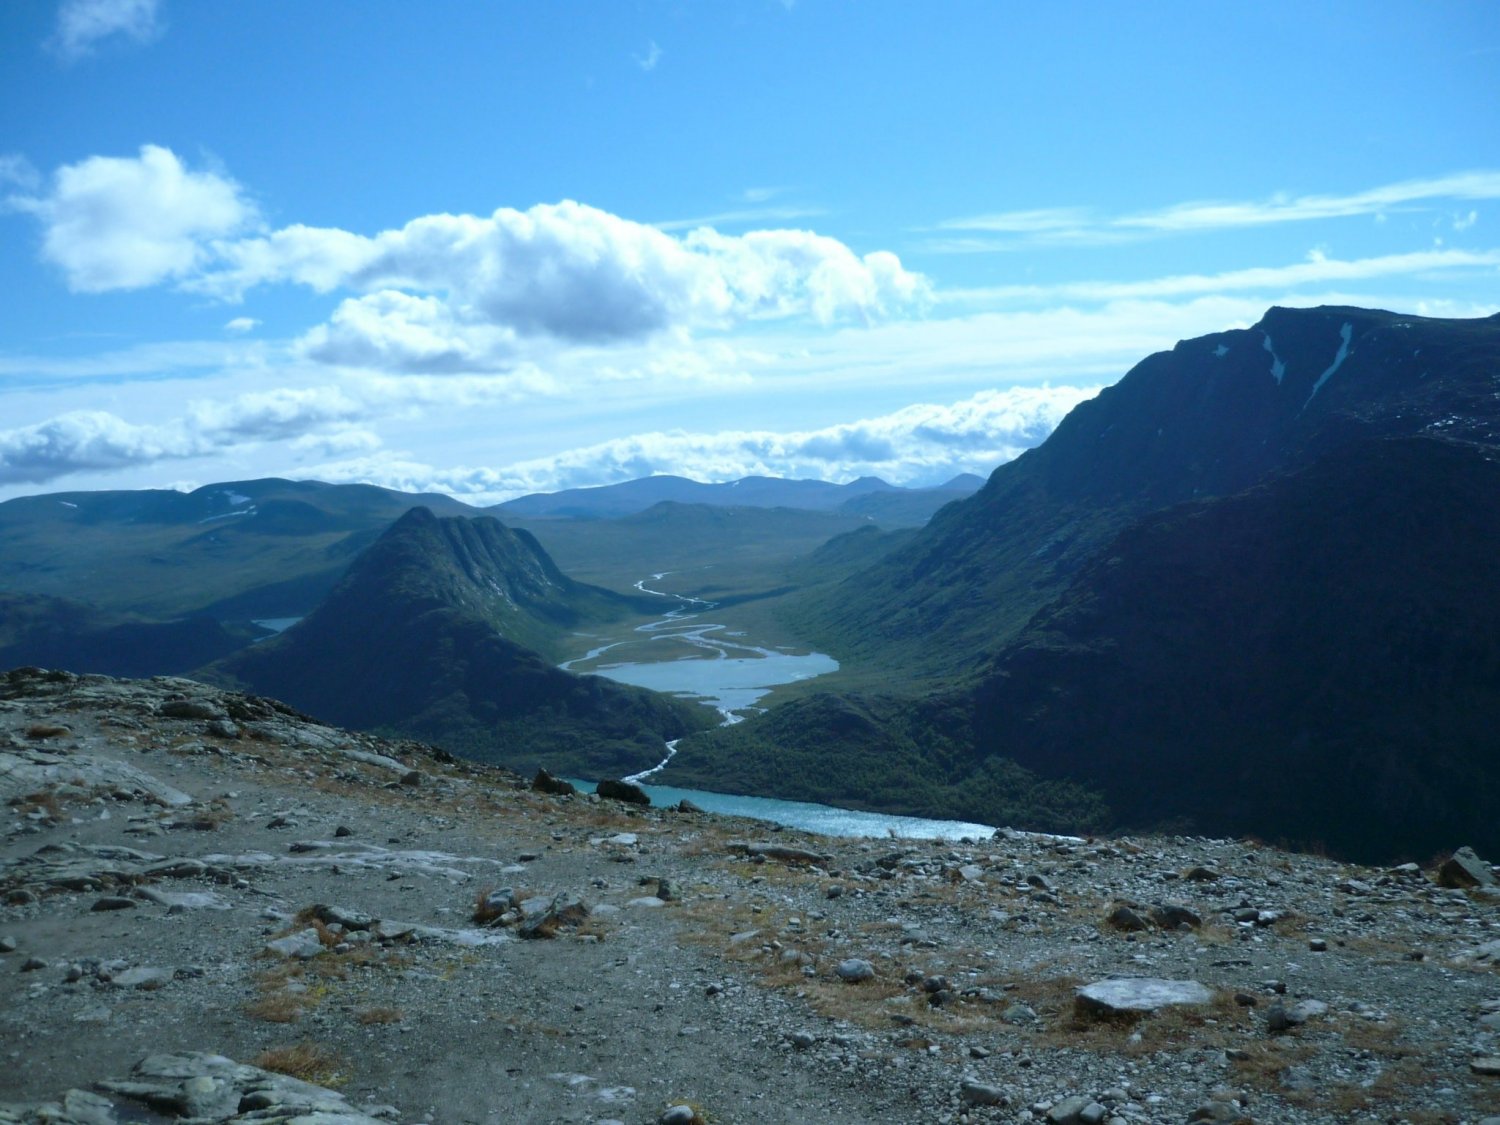 View from the trail over Besseggen